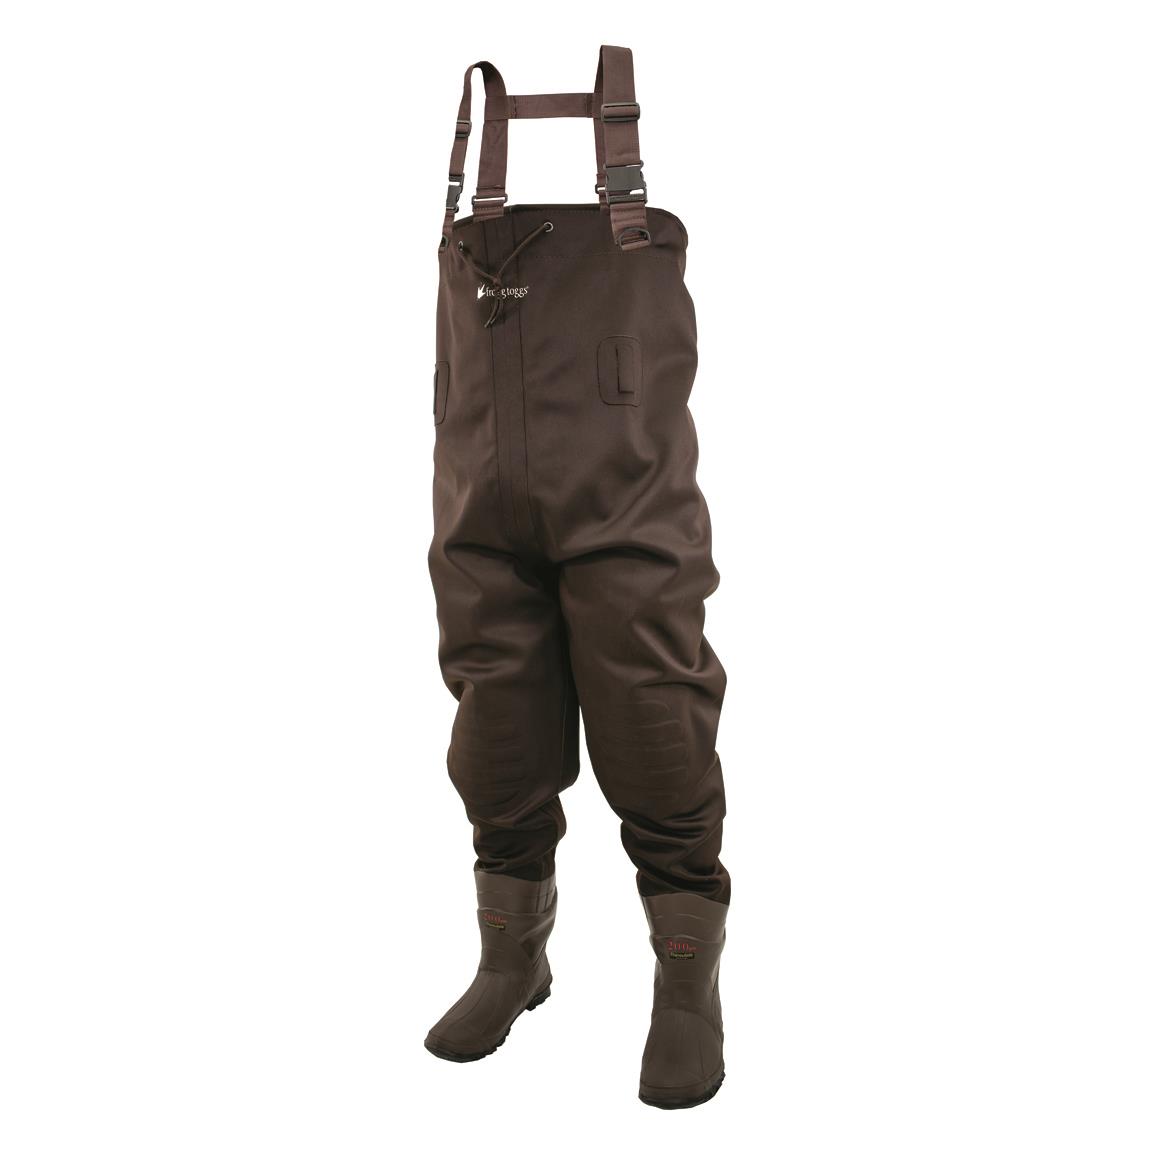 frogg toggs Cascades Elite Insulated Cleated Rubber Lug-sole Bootfoot Chest Waders, Brown